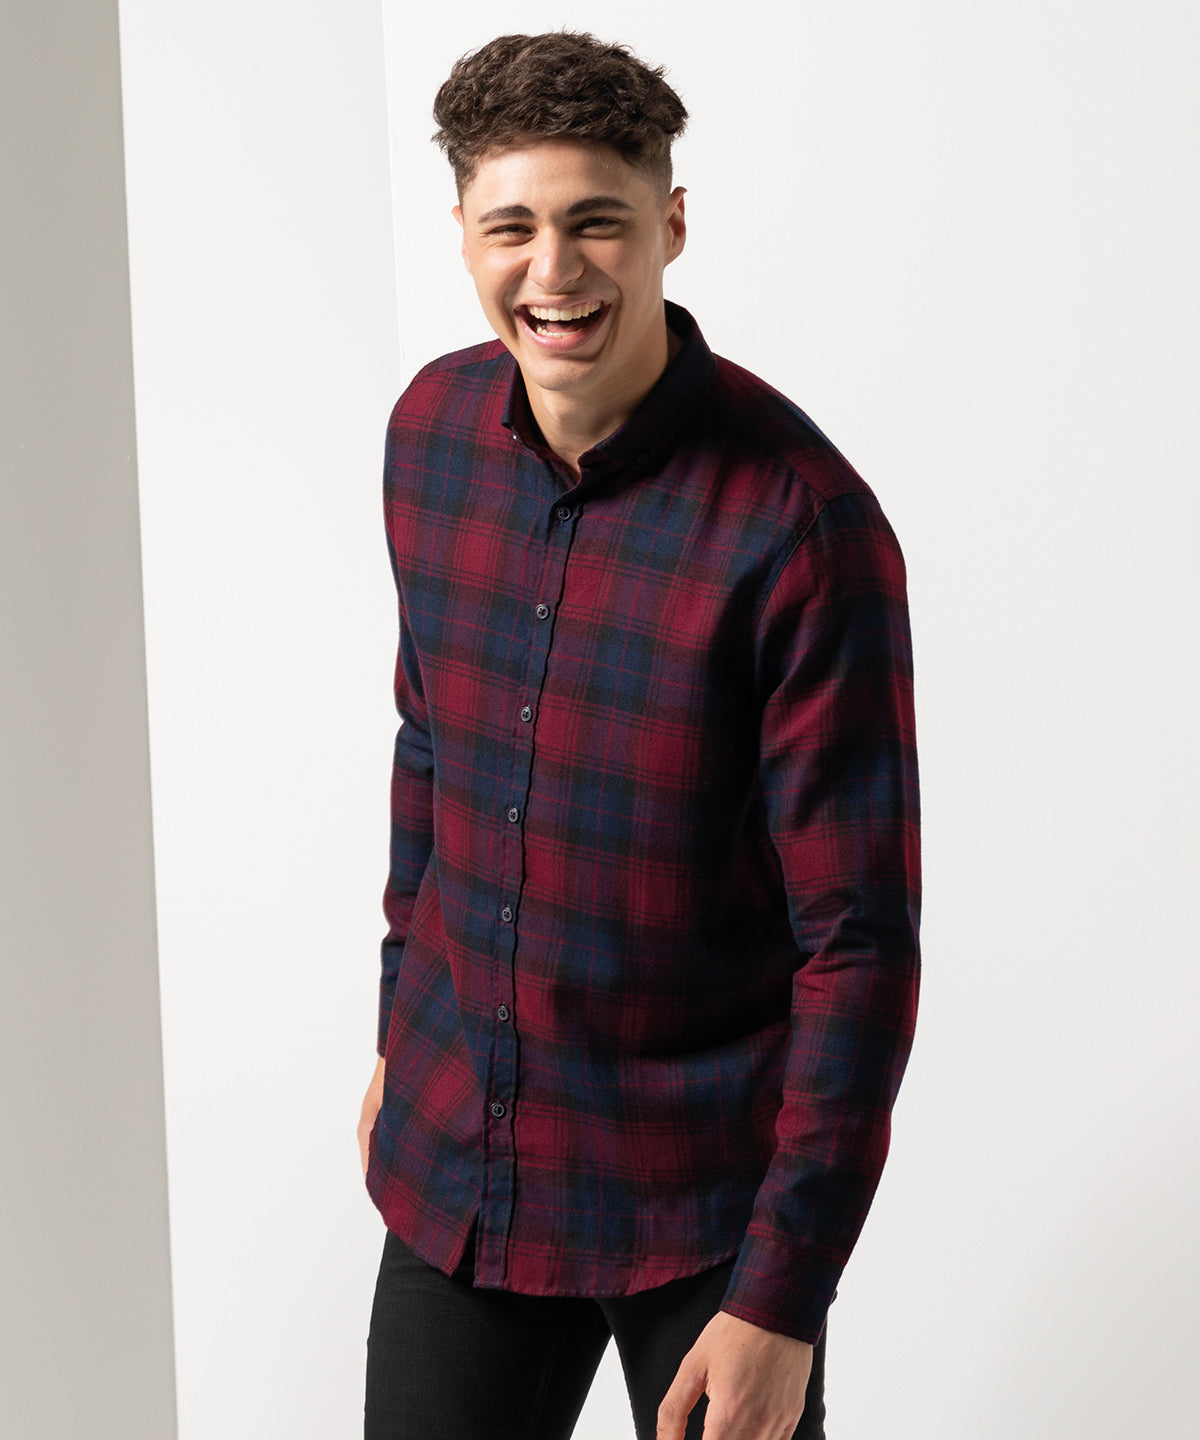 Bolir - Brushed Check Casual Shirt With Button-down Collar